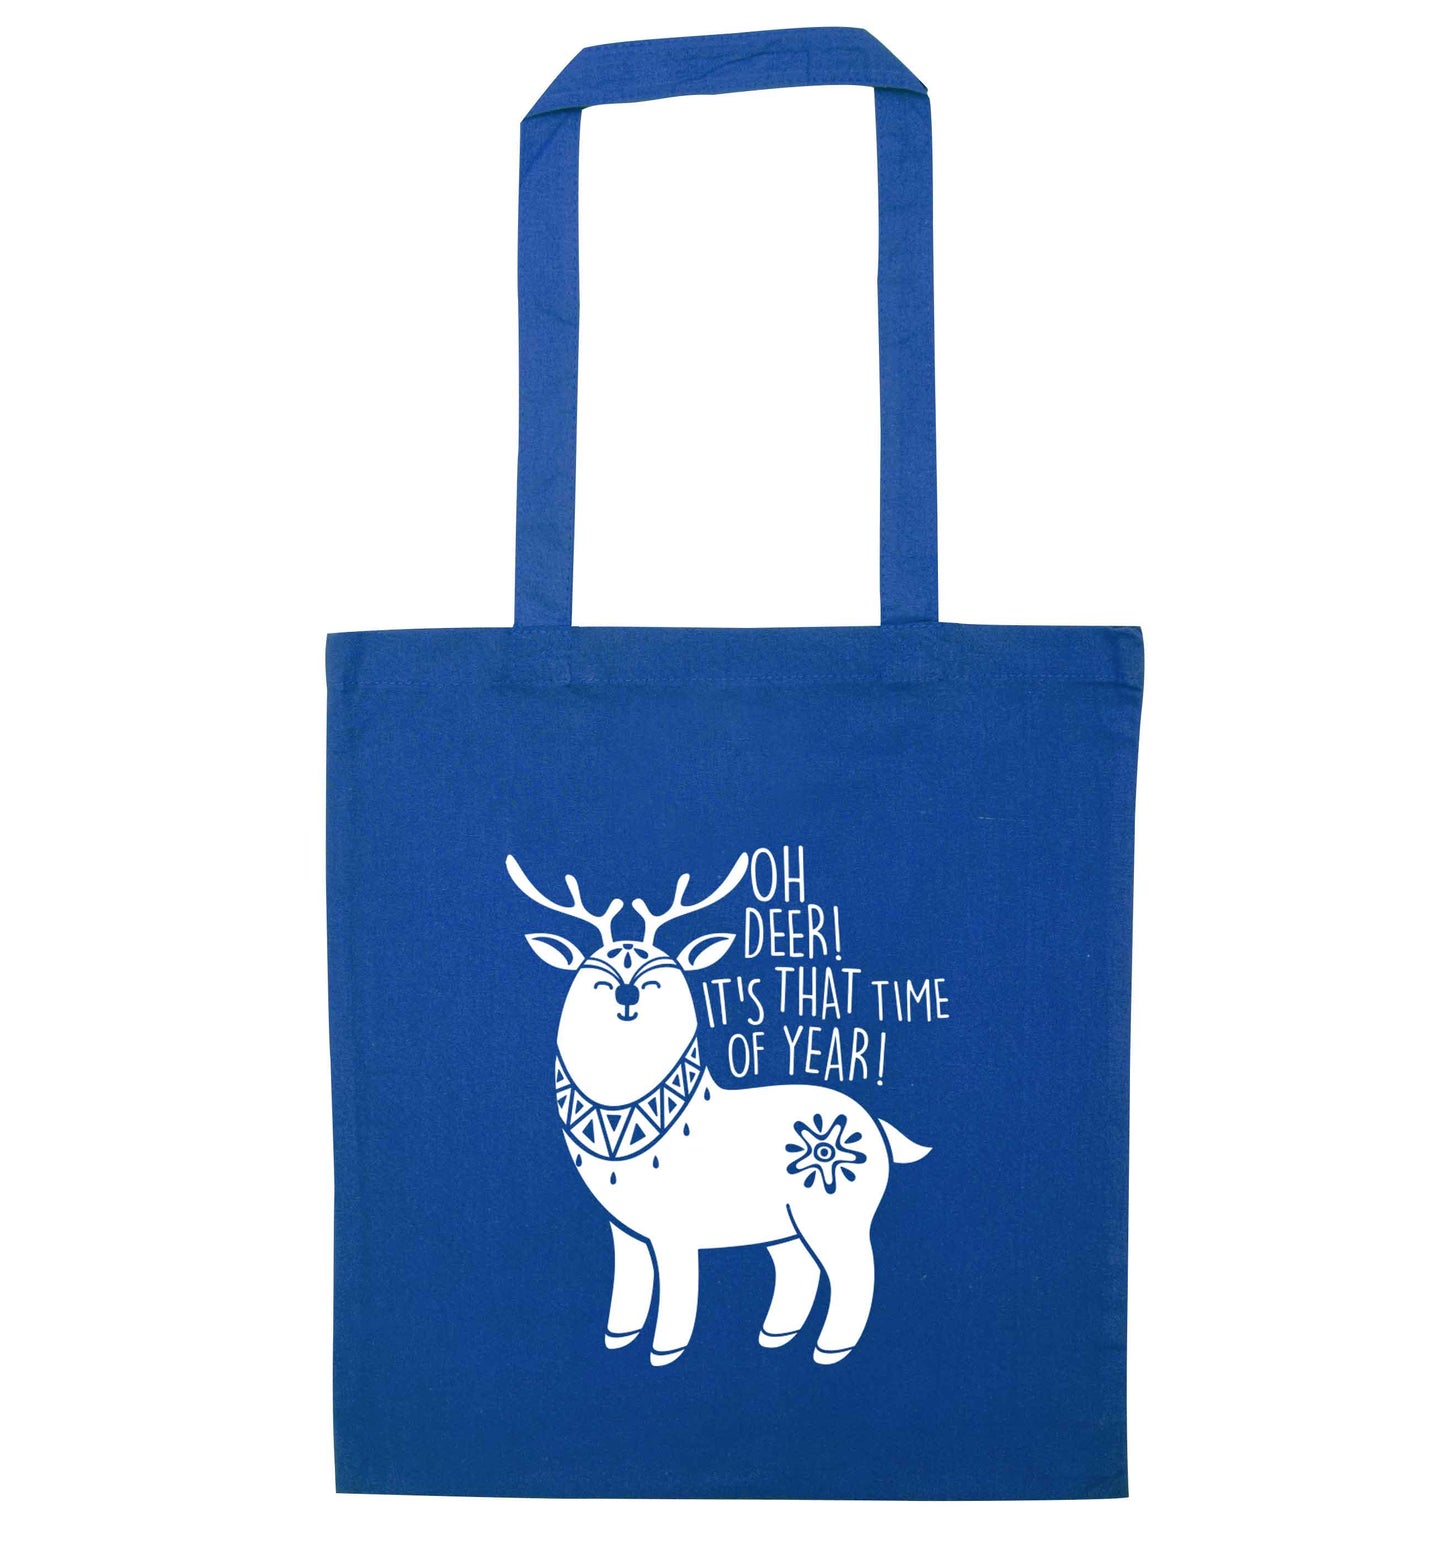 Oh dear it's that time of year blue tote bag